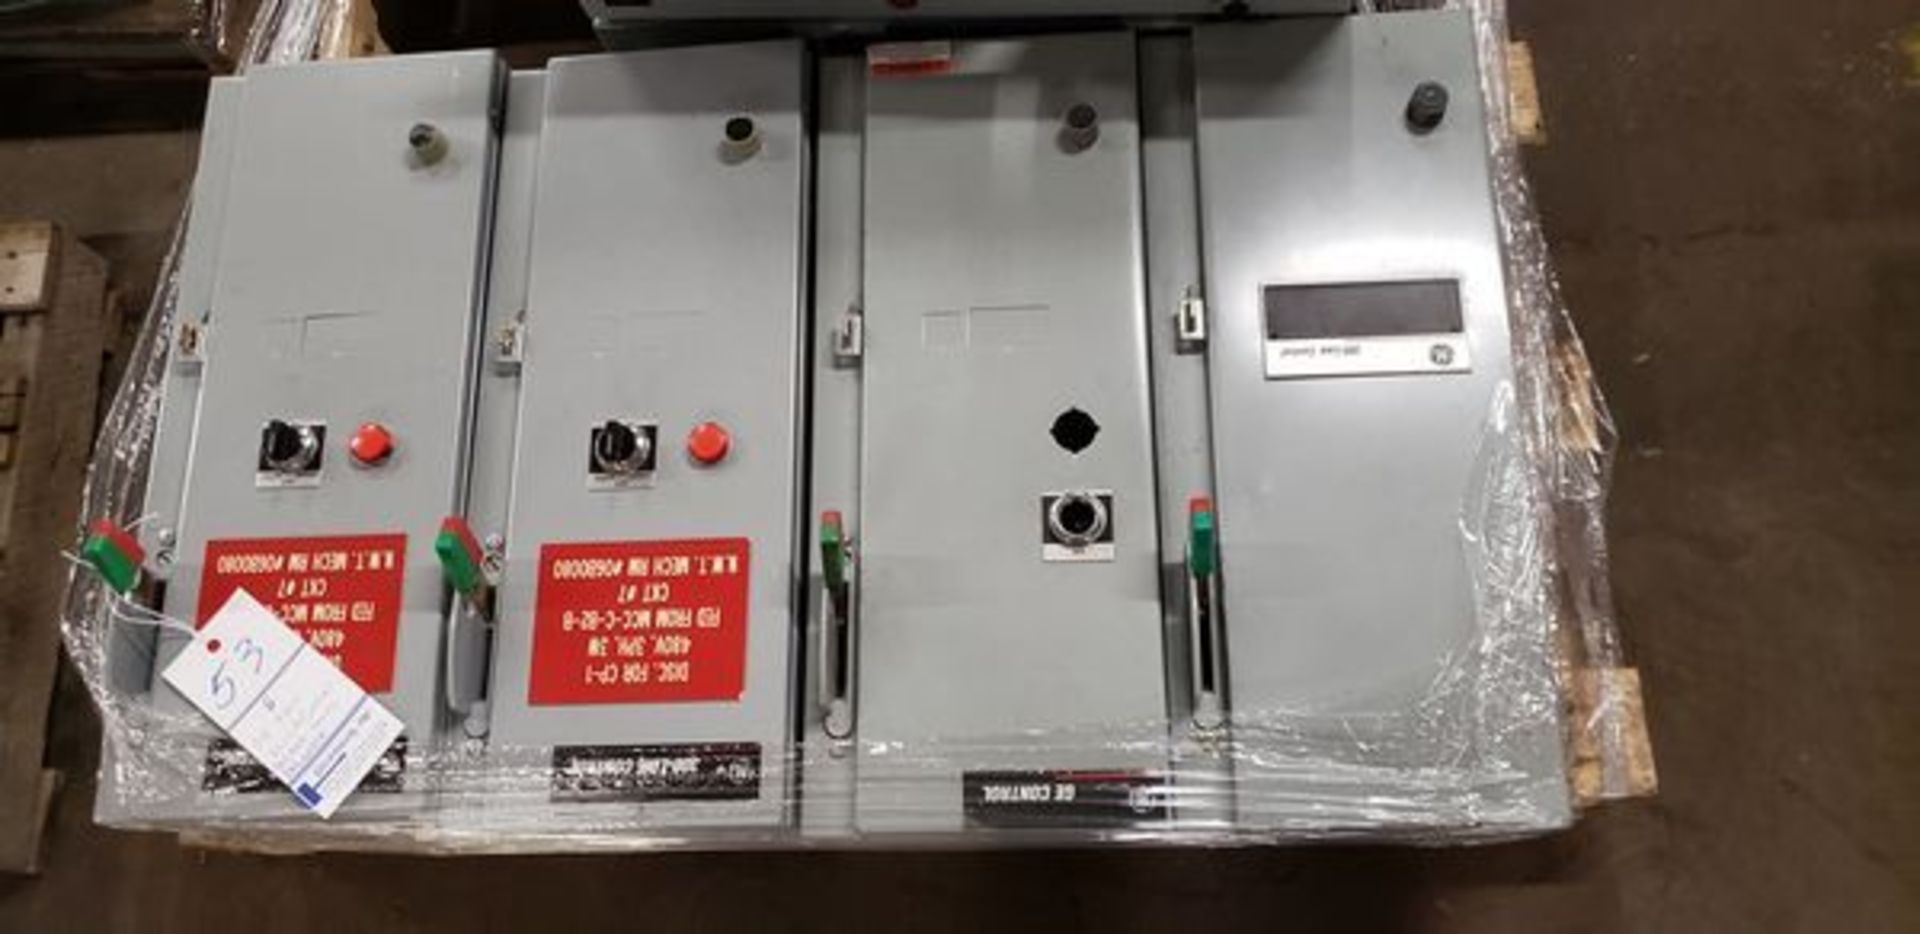 LOT OF 6 GE 480V 300 LINE CONTROL BOXES - Image 2 of 5